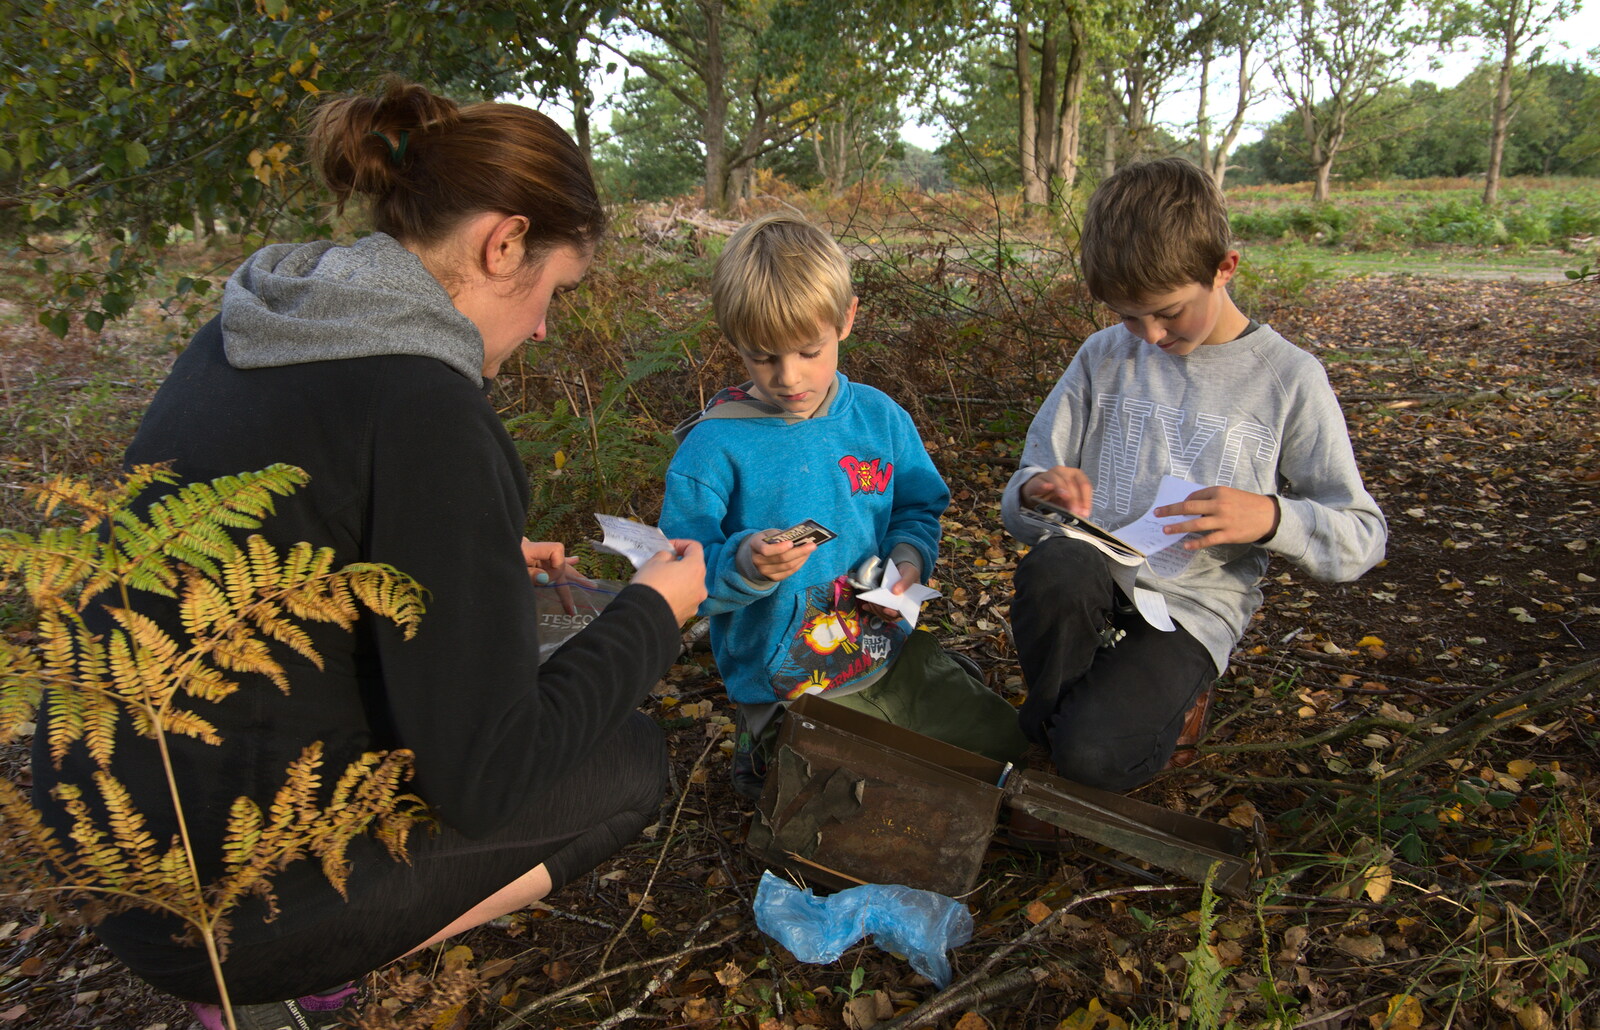 The gang inspect the contents of the geocache from Evidence of Autumn: Geocaching on Knettishall Heath, Suffolk - 7th October 2018